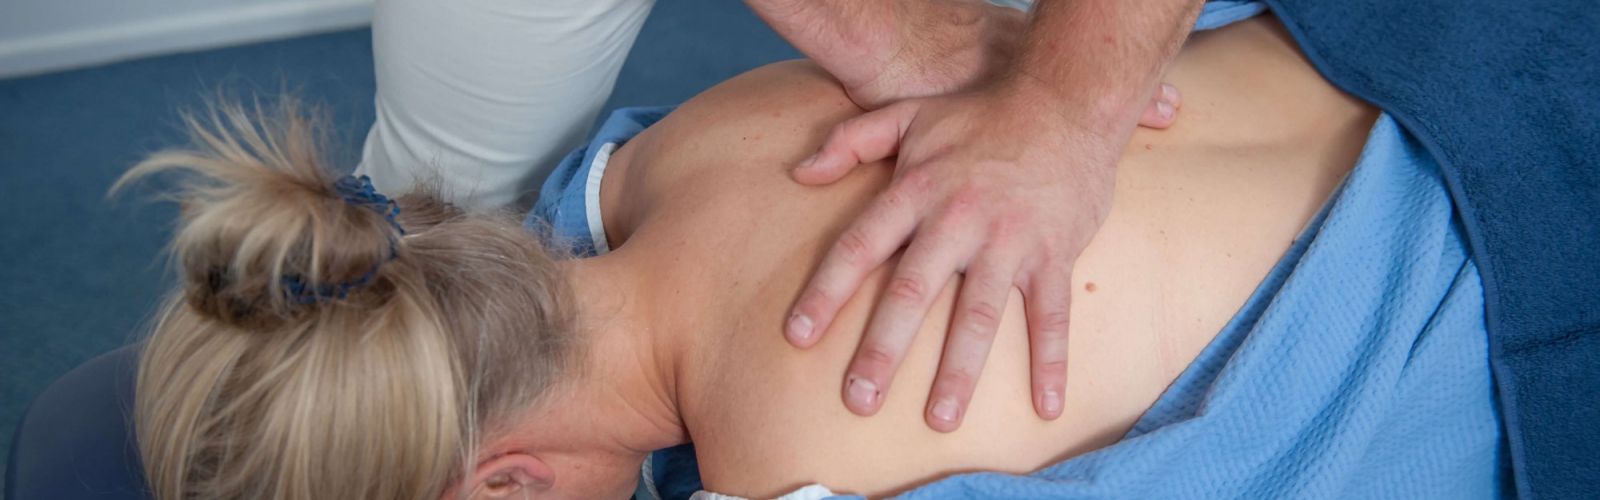 A chiropractor giving treatment on a patients back lying face down